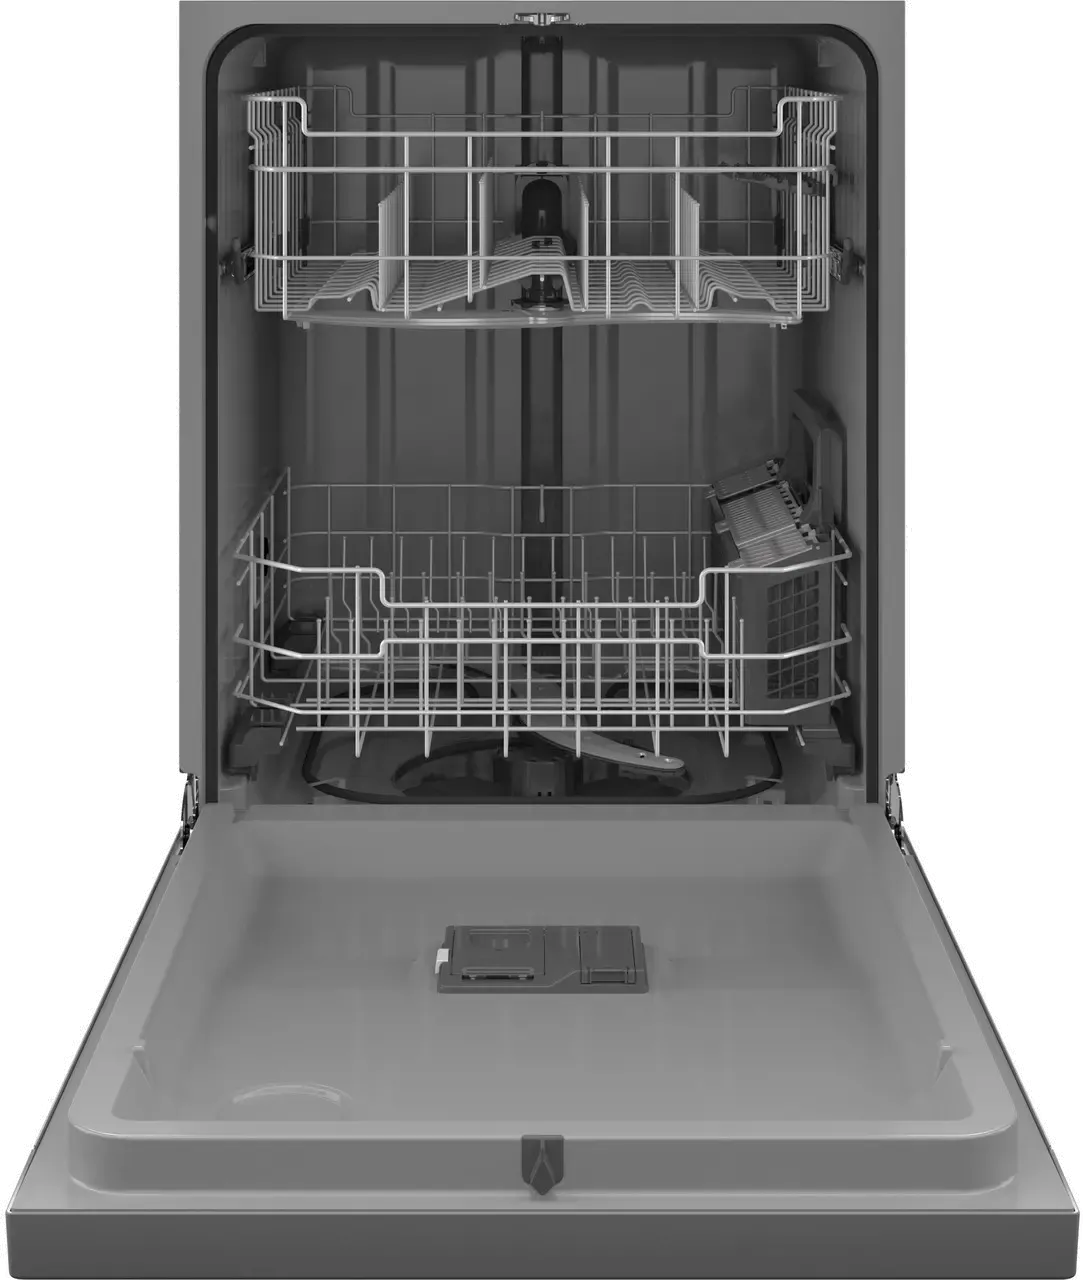 GE Front Control Dishwasher - Stainless Steel